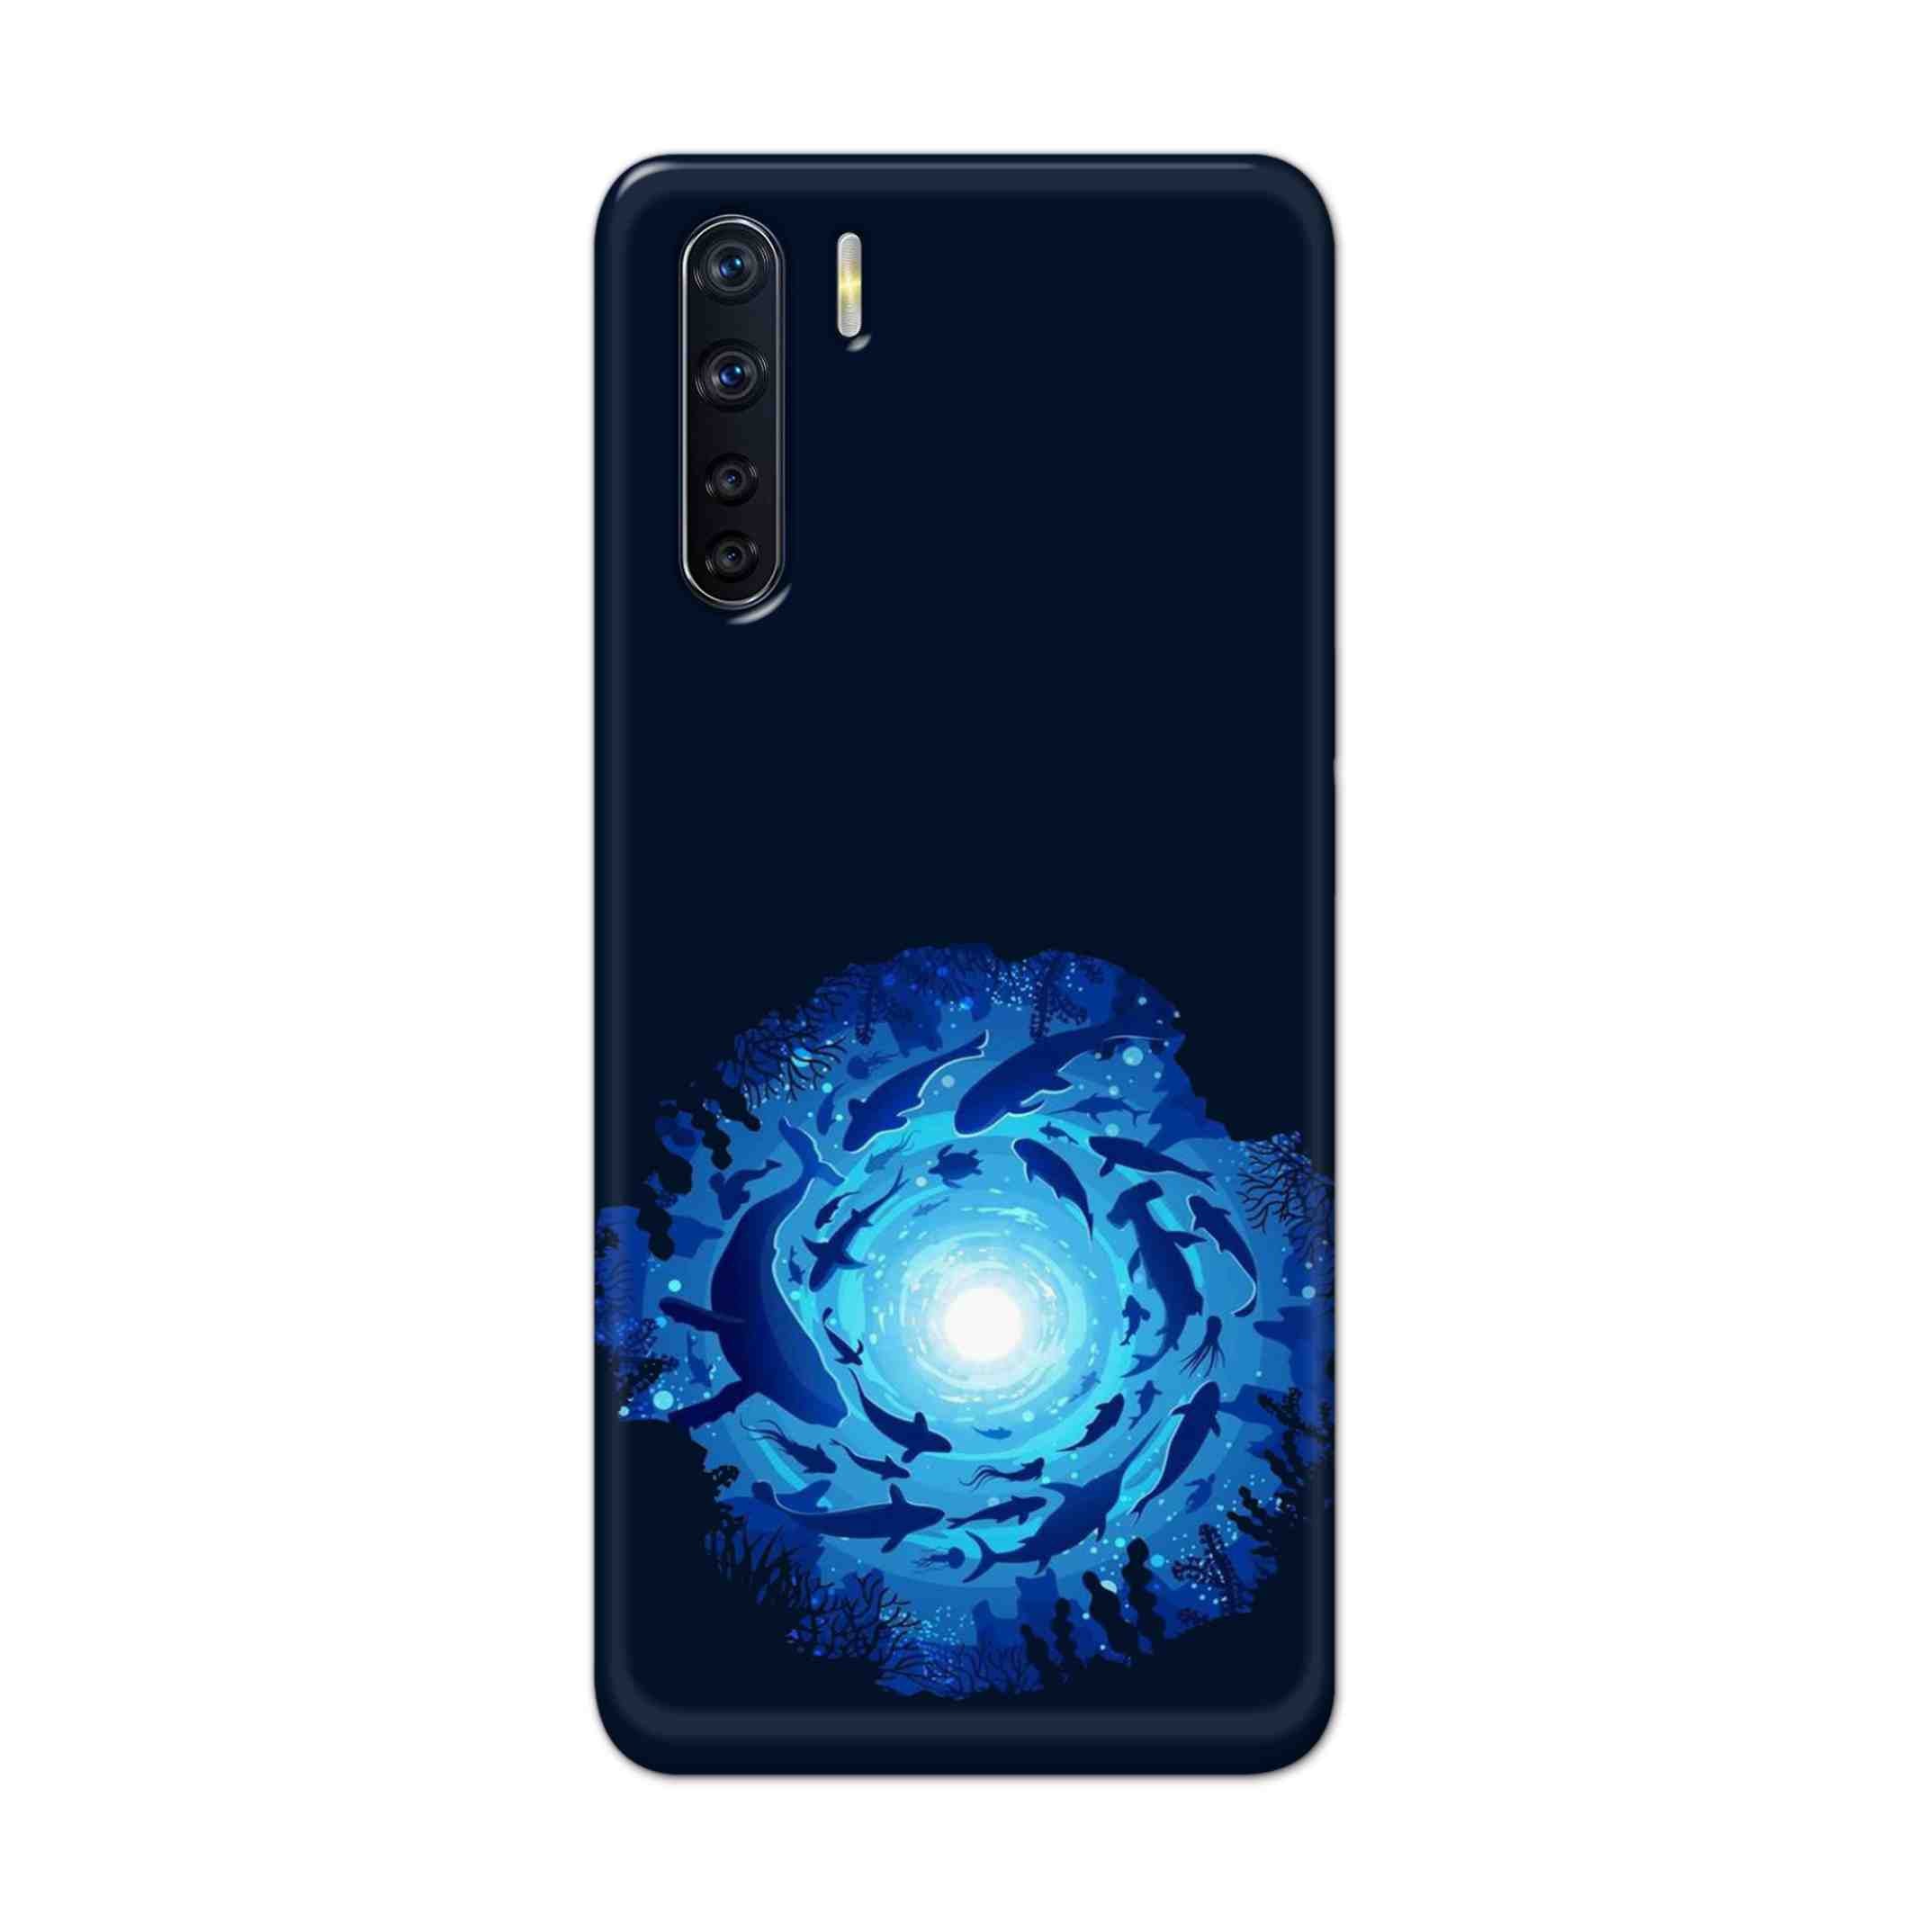 Buy Blue Whale Hard Back Mobile Phone Case Cover For OPPO F15 Online